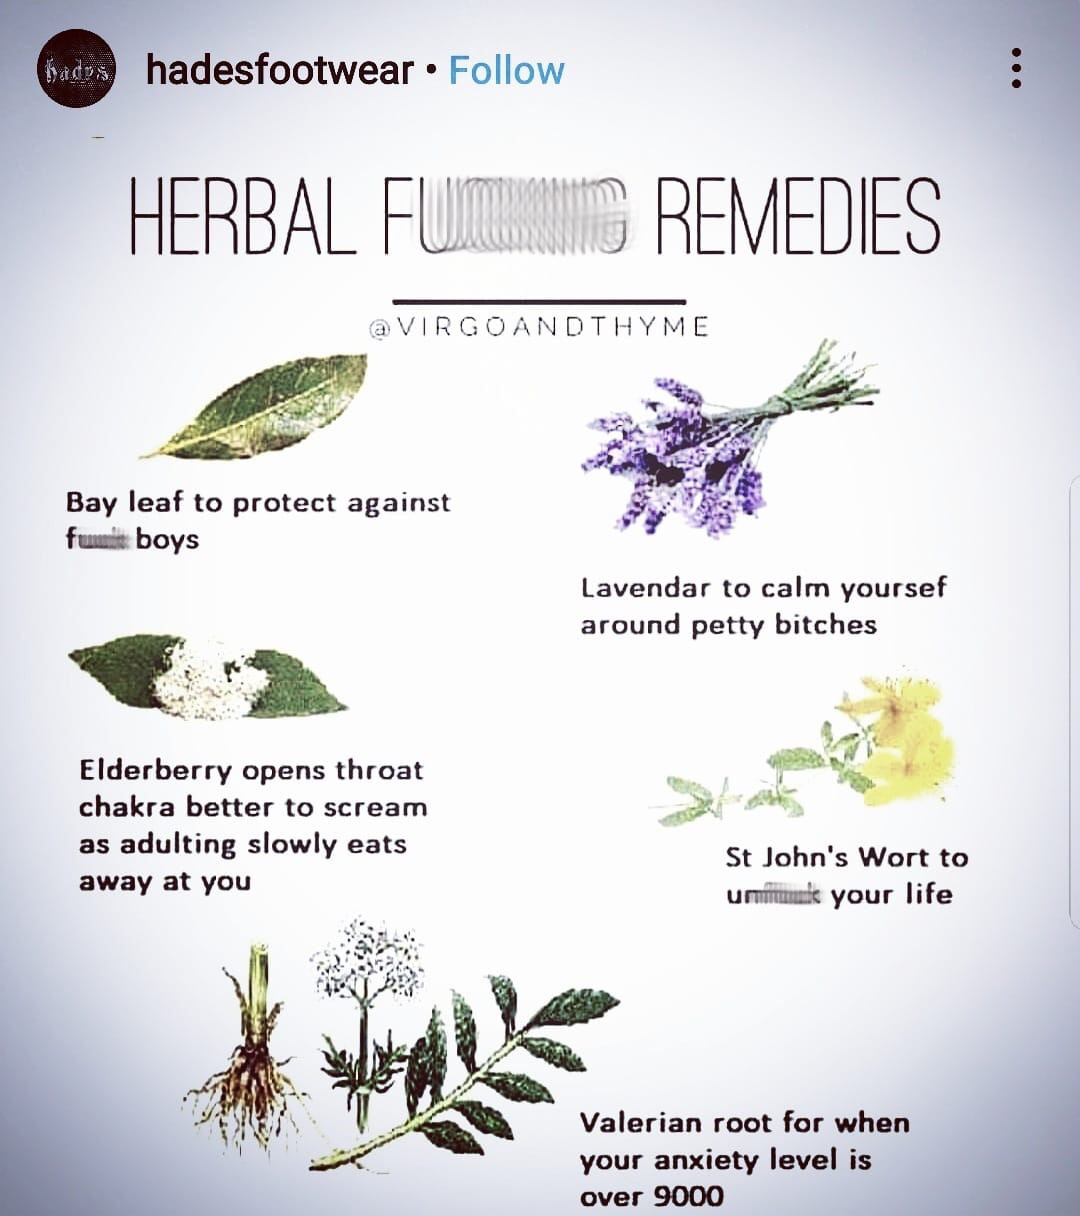 herbal fucking remedies meme - Badys hadesfootwear Herbal Fumesining Remedies Bay leaf to protect against fummi boys Lavendar to calm yoursef around petty bitches Elderberry opens throat chakra better to scream as adulting slowly eats away at you St John'